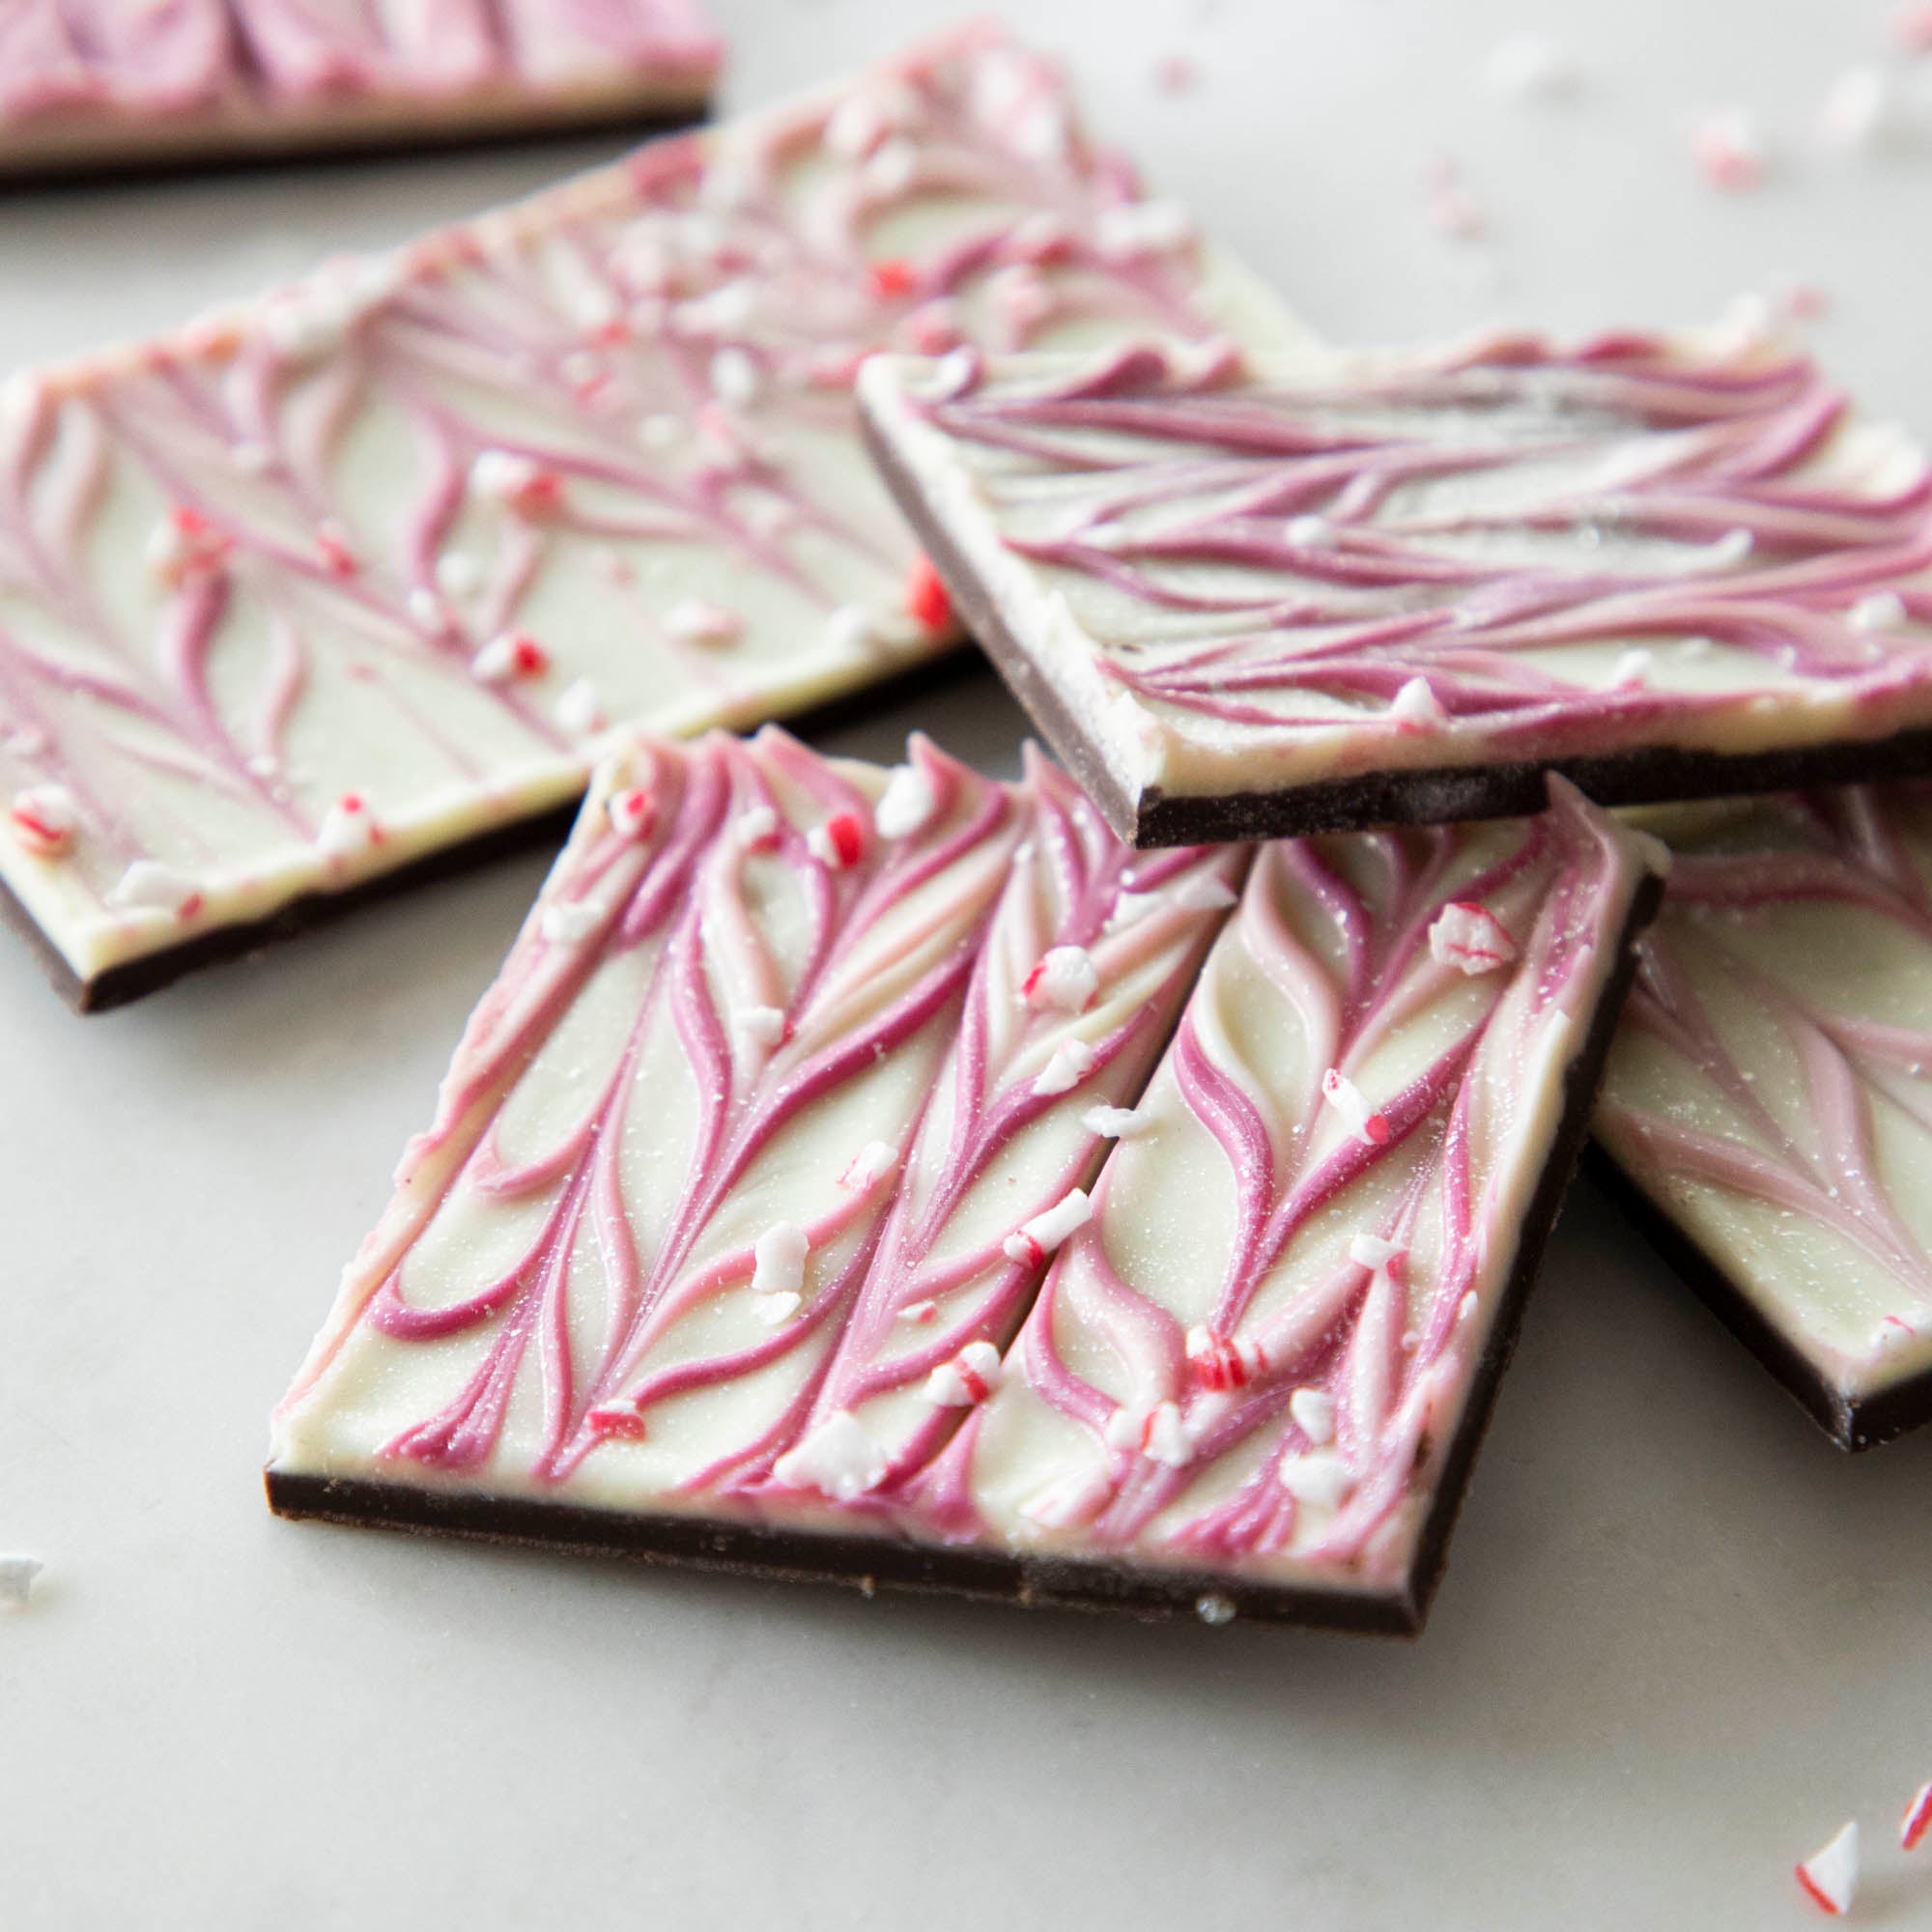 Hester &amp; Cook Sparkle Bark is a delightful chocolate treat made with all-natural ingredients, featuring peppermint chocolate squares adorned with white and pink icing.